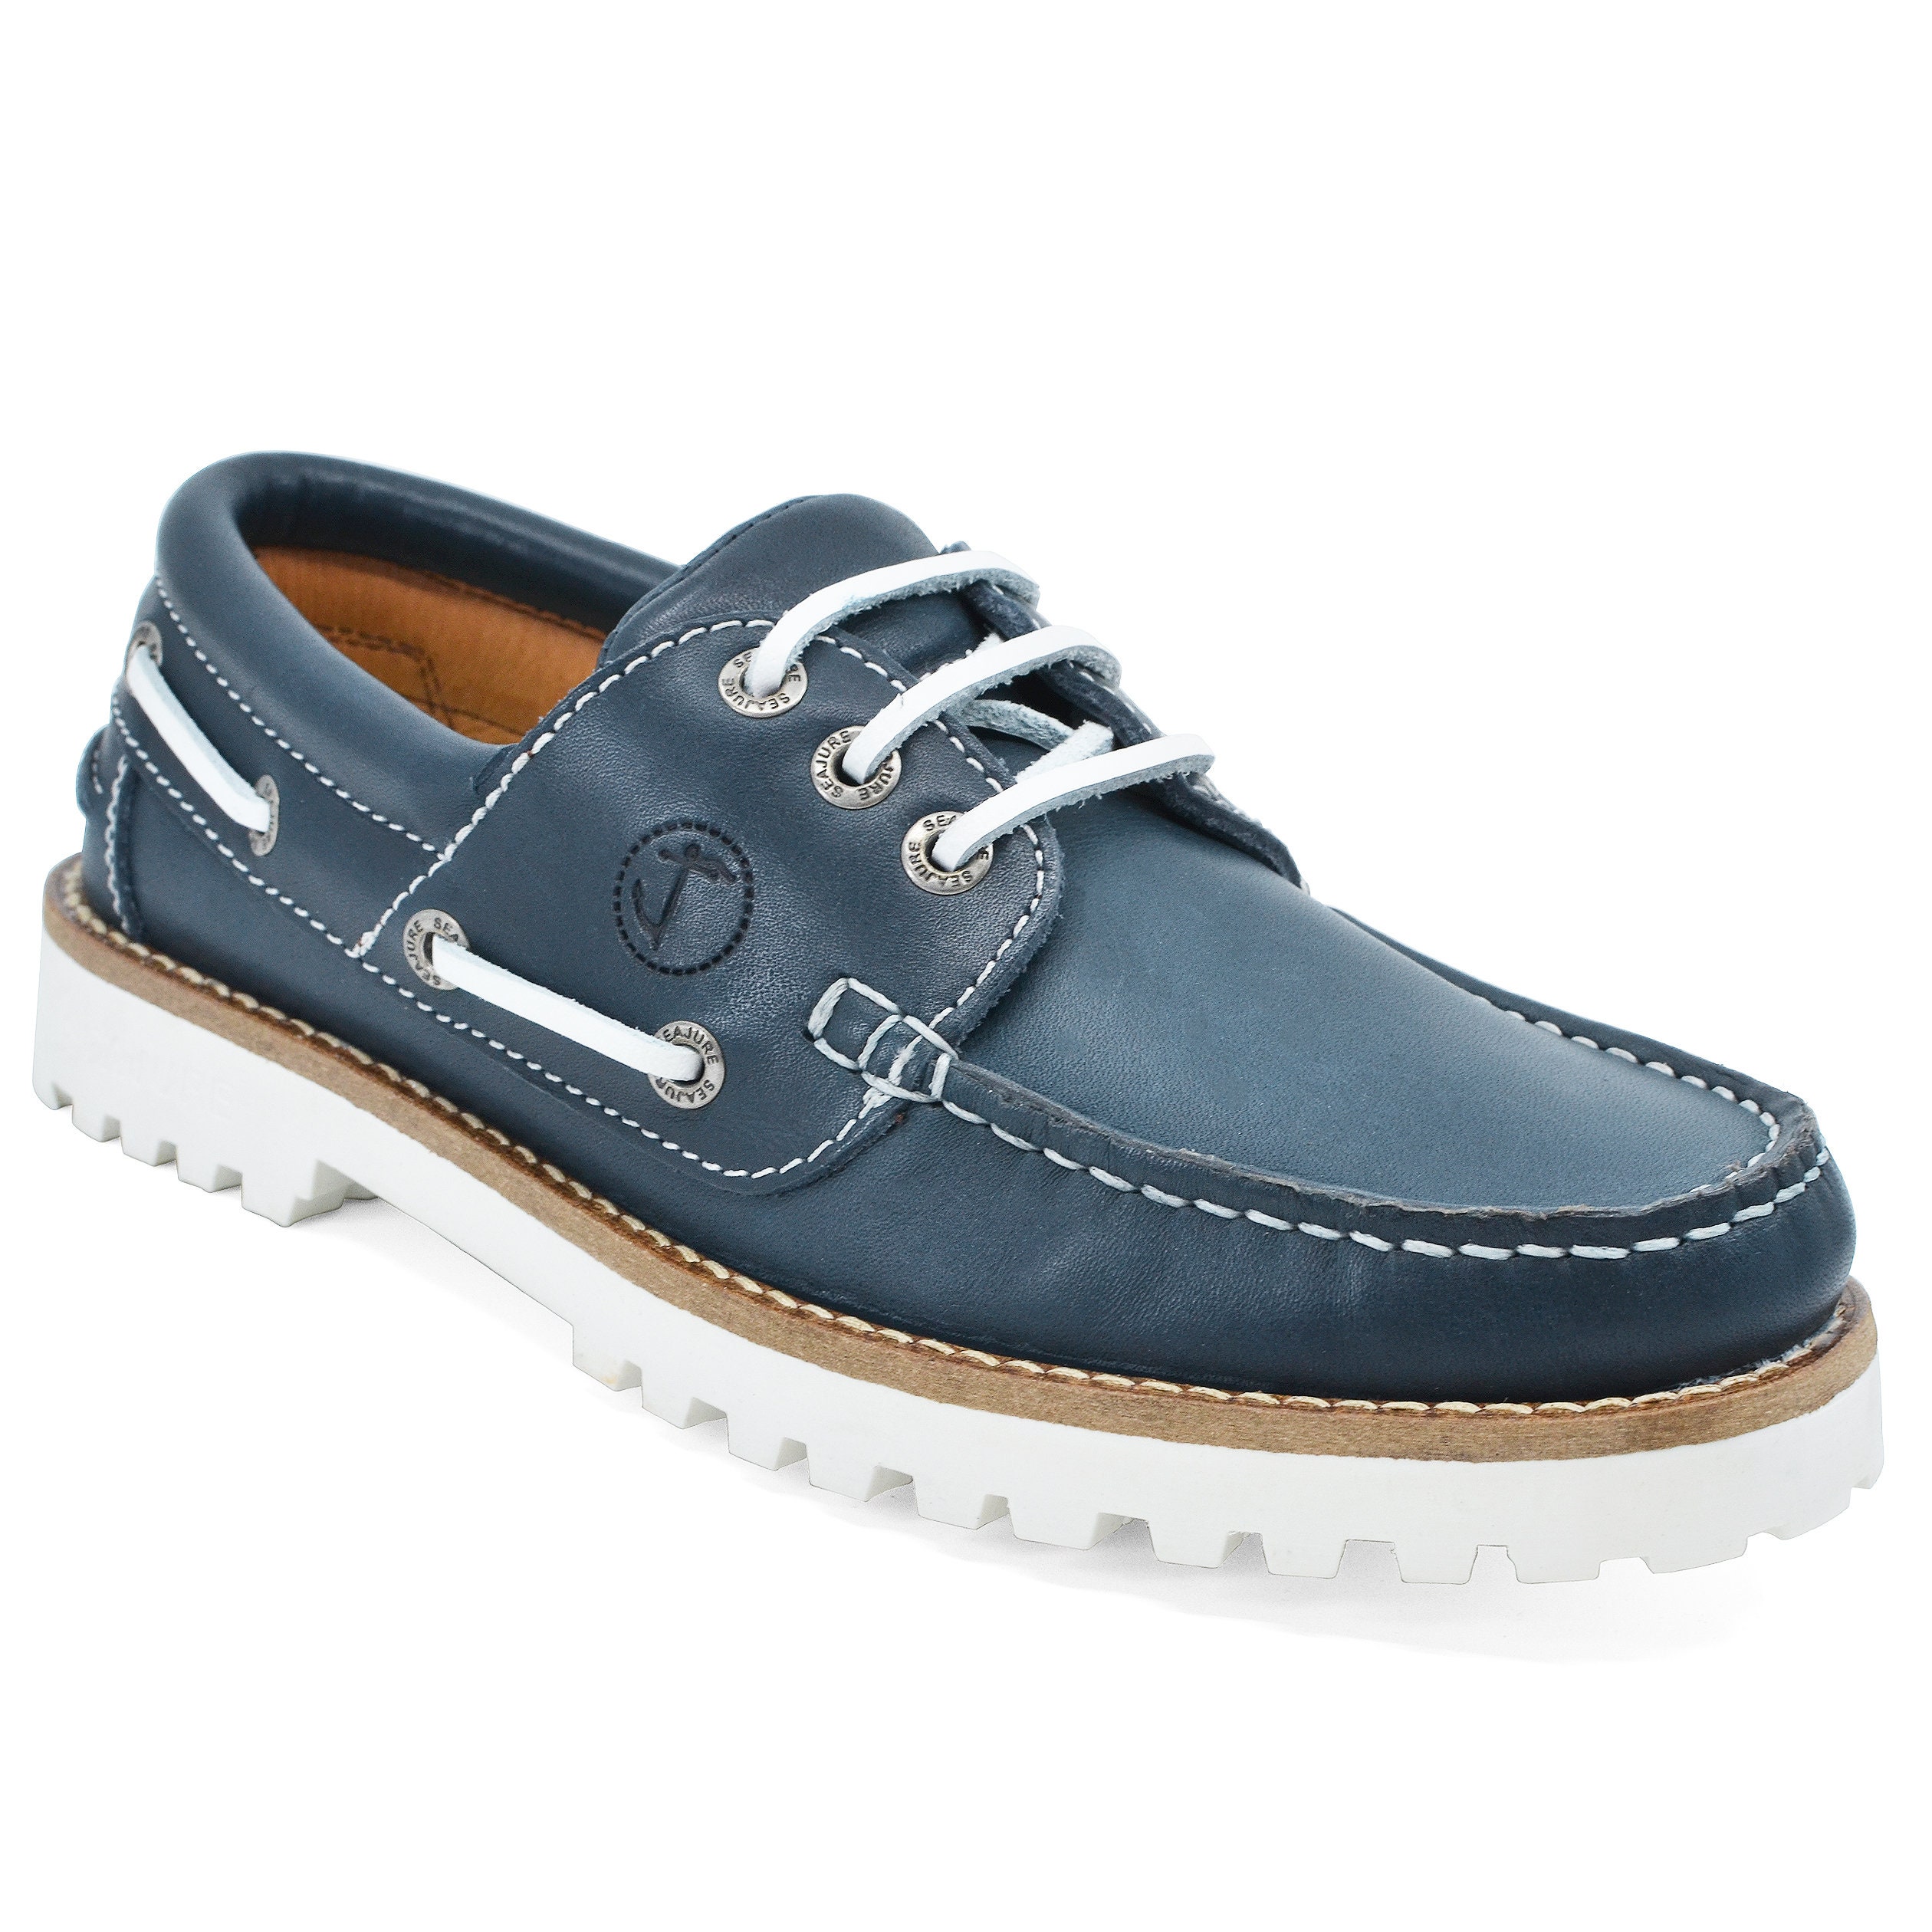 Womens Boat Shoes Seajure Sibang Leather Navy Blue and White 